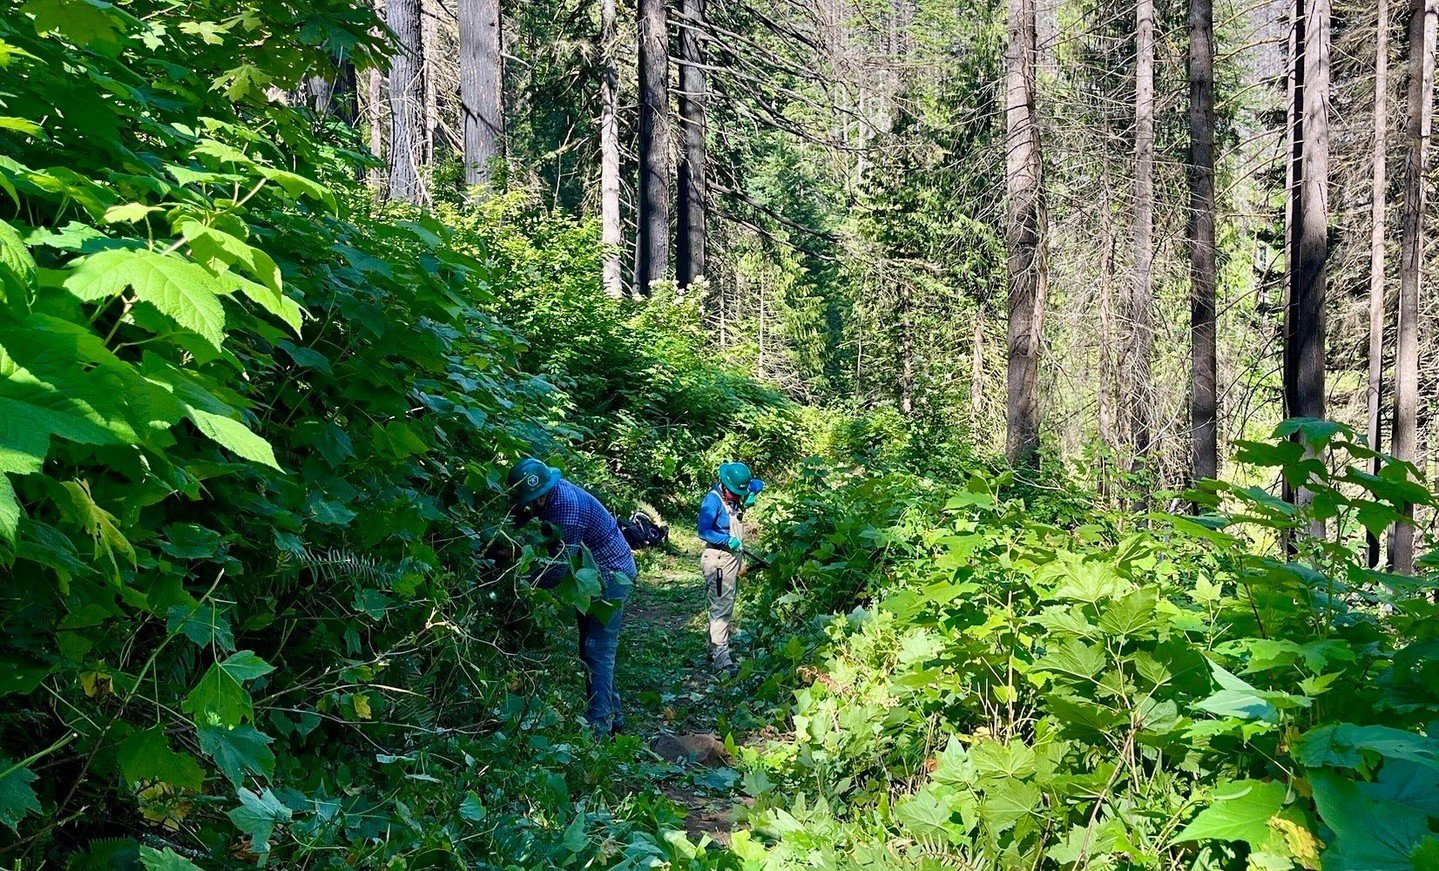 The Oregon Timber Trail Alliance has adopted the easternmost three miles of the Fifteenmile trail and each year we cut back the brush and remove logs that have fallen into the trail. We&rsquo;ll be back this year on National Trails Day, June 1, to do